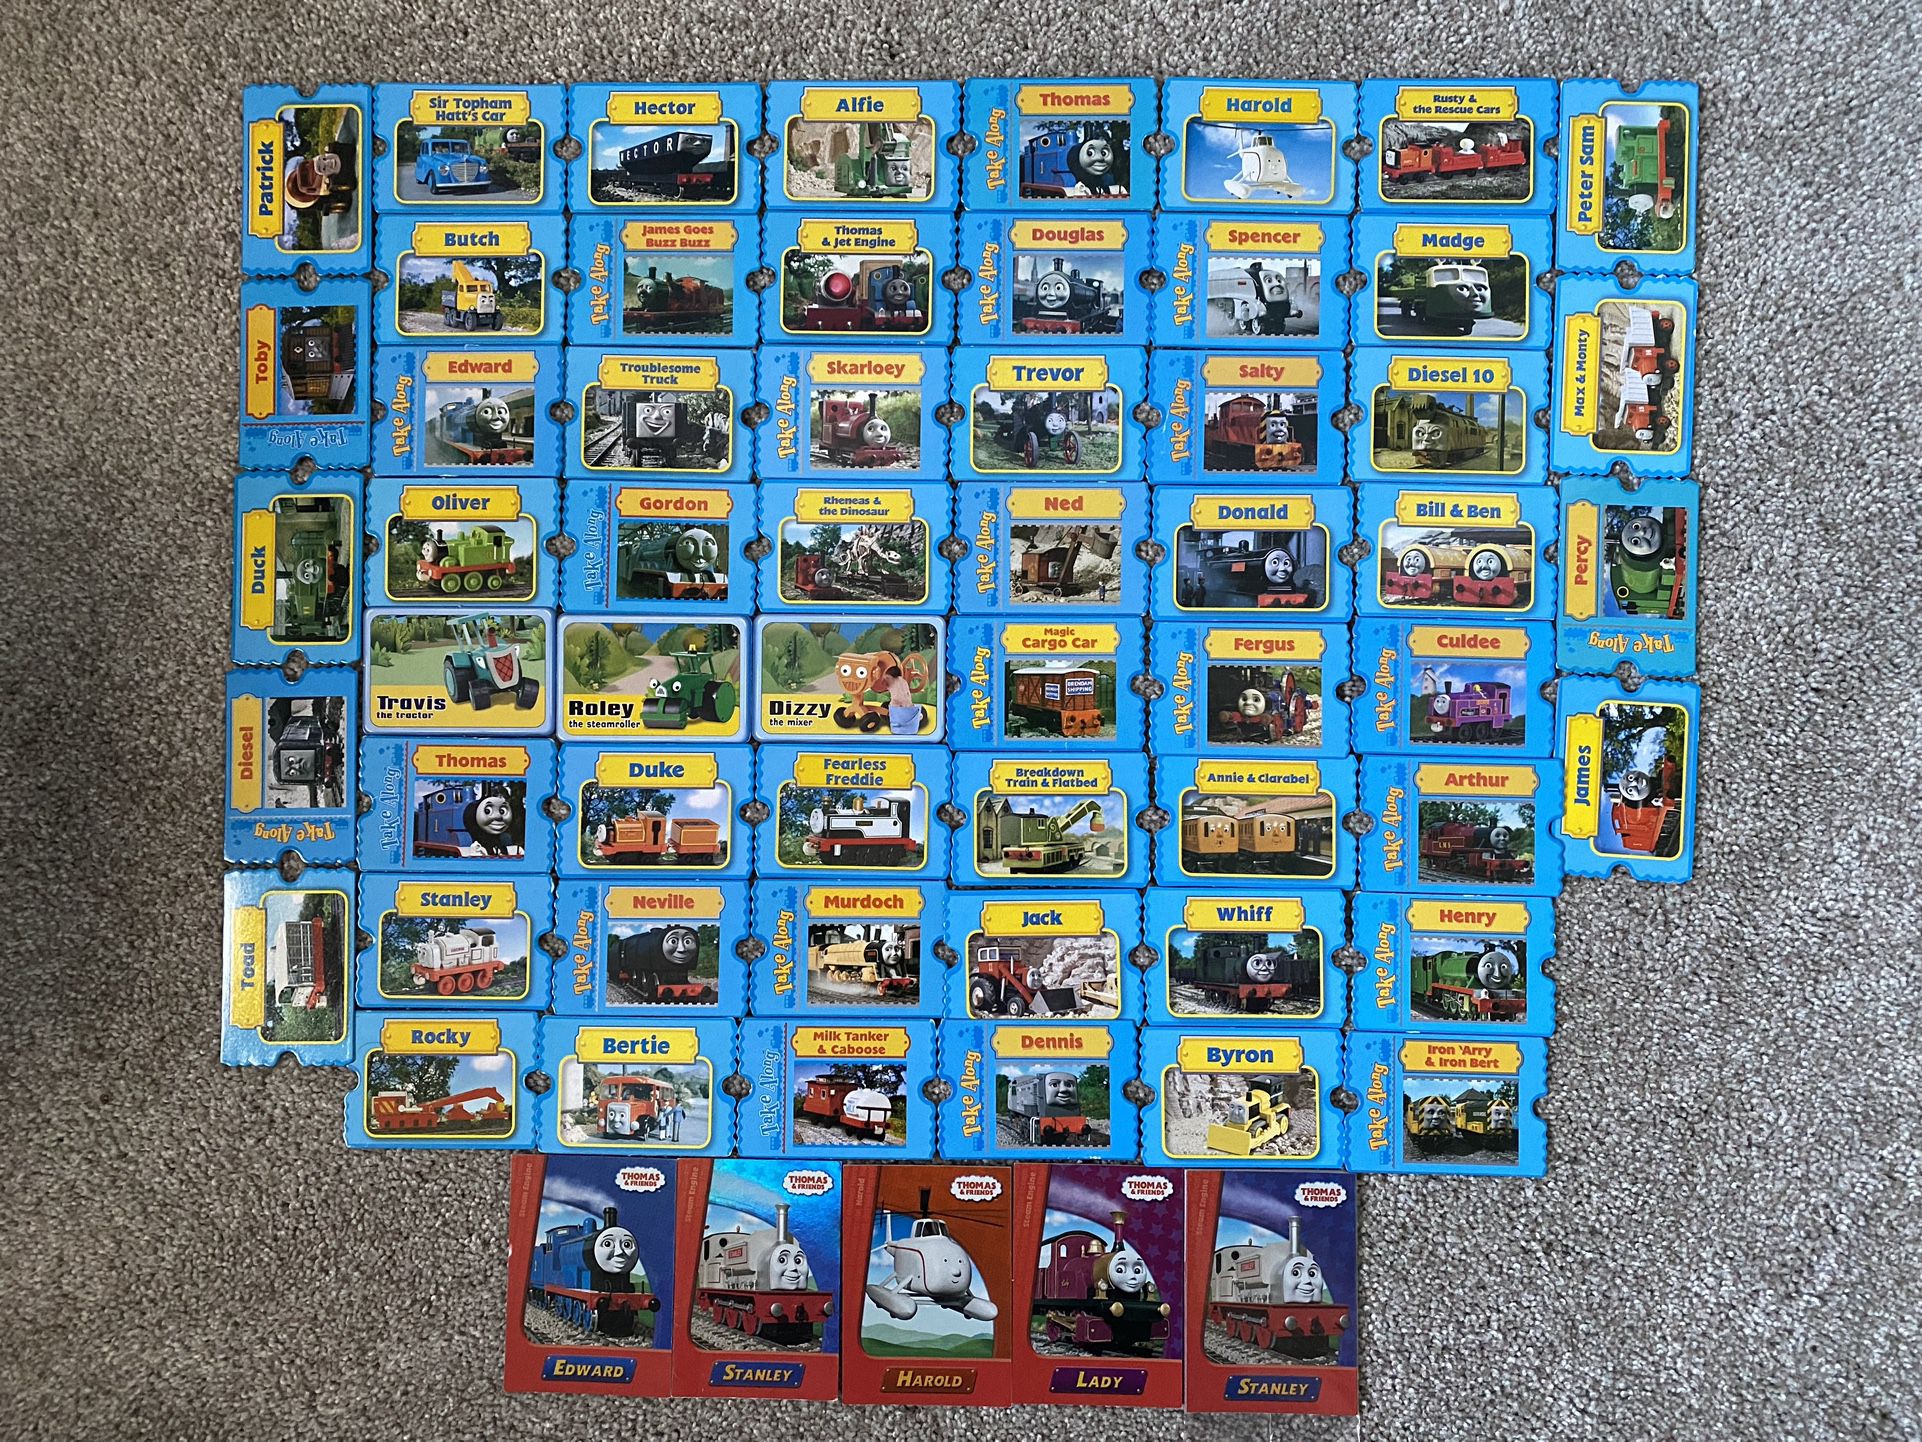 Thomas And Friends Take Along Train Collectors Cards Lot Of 62 Cards + Booklets